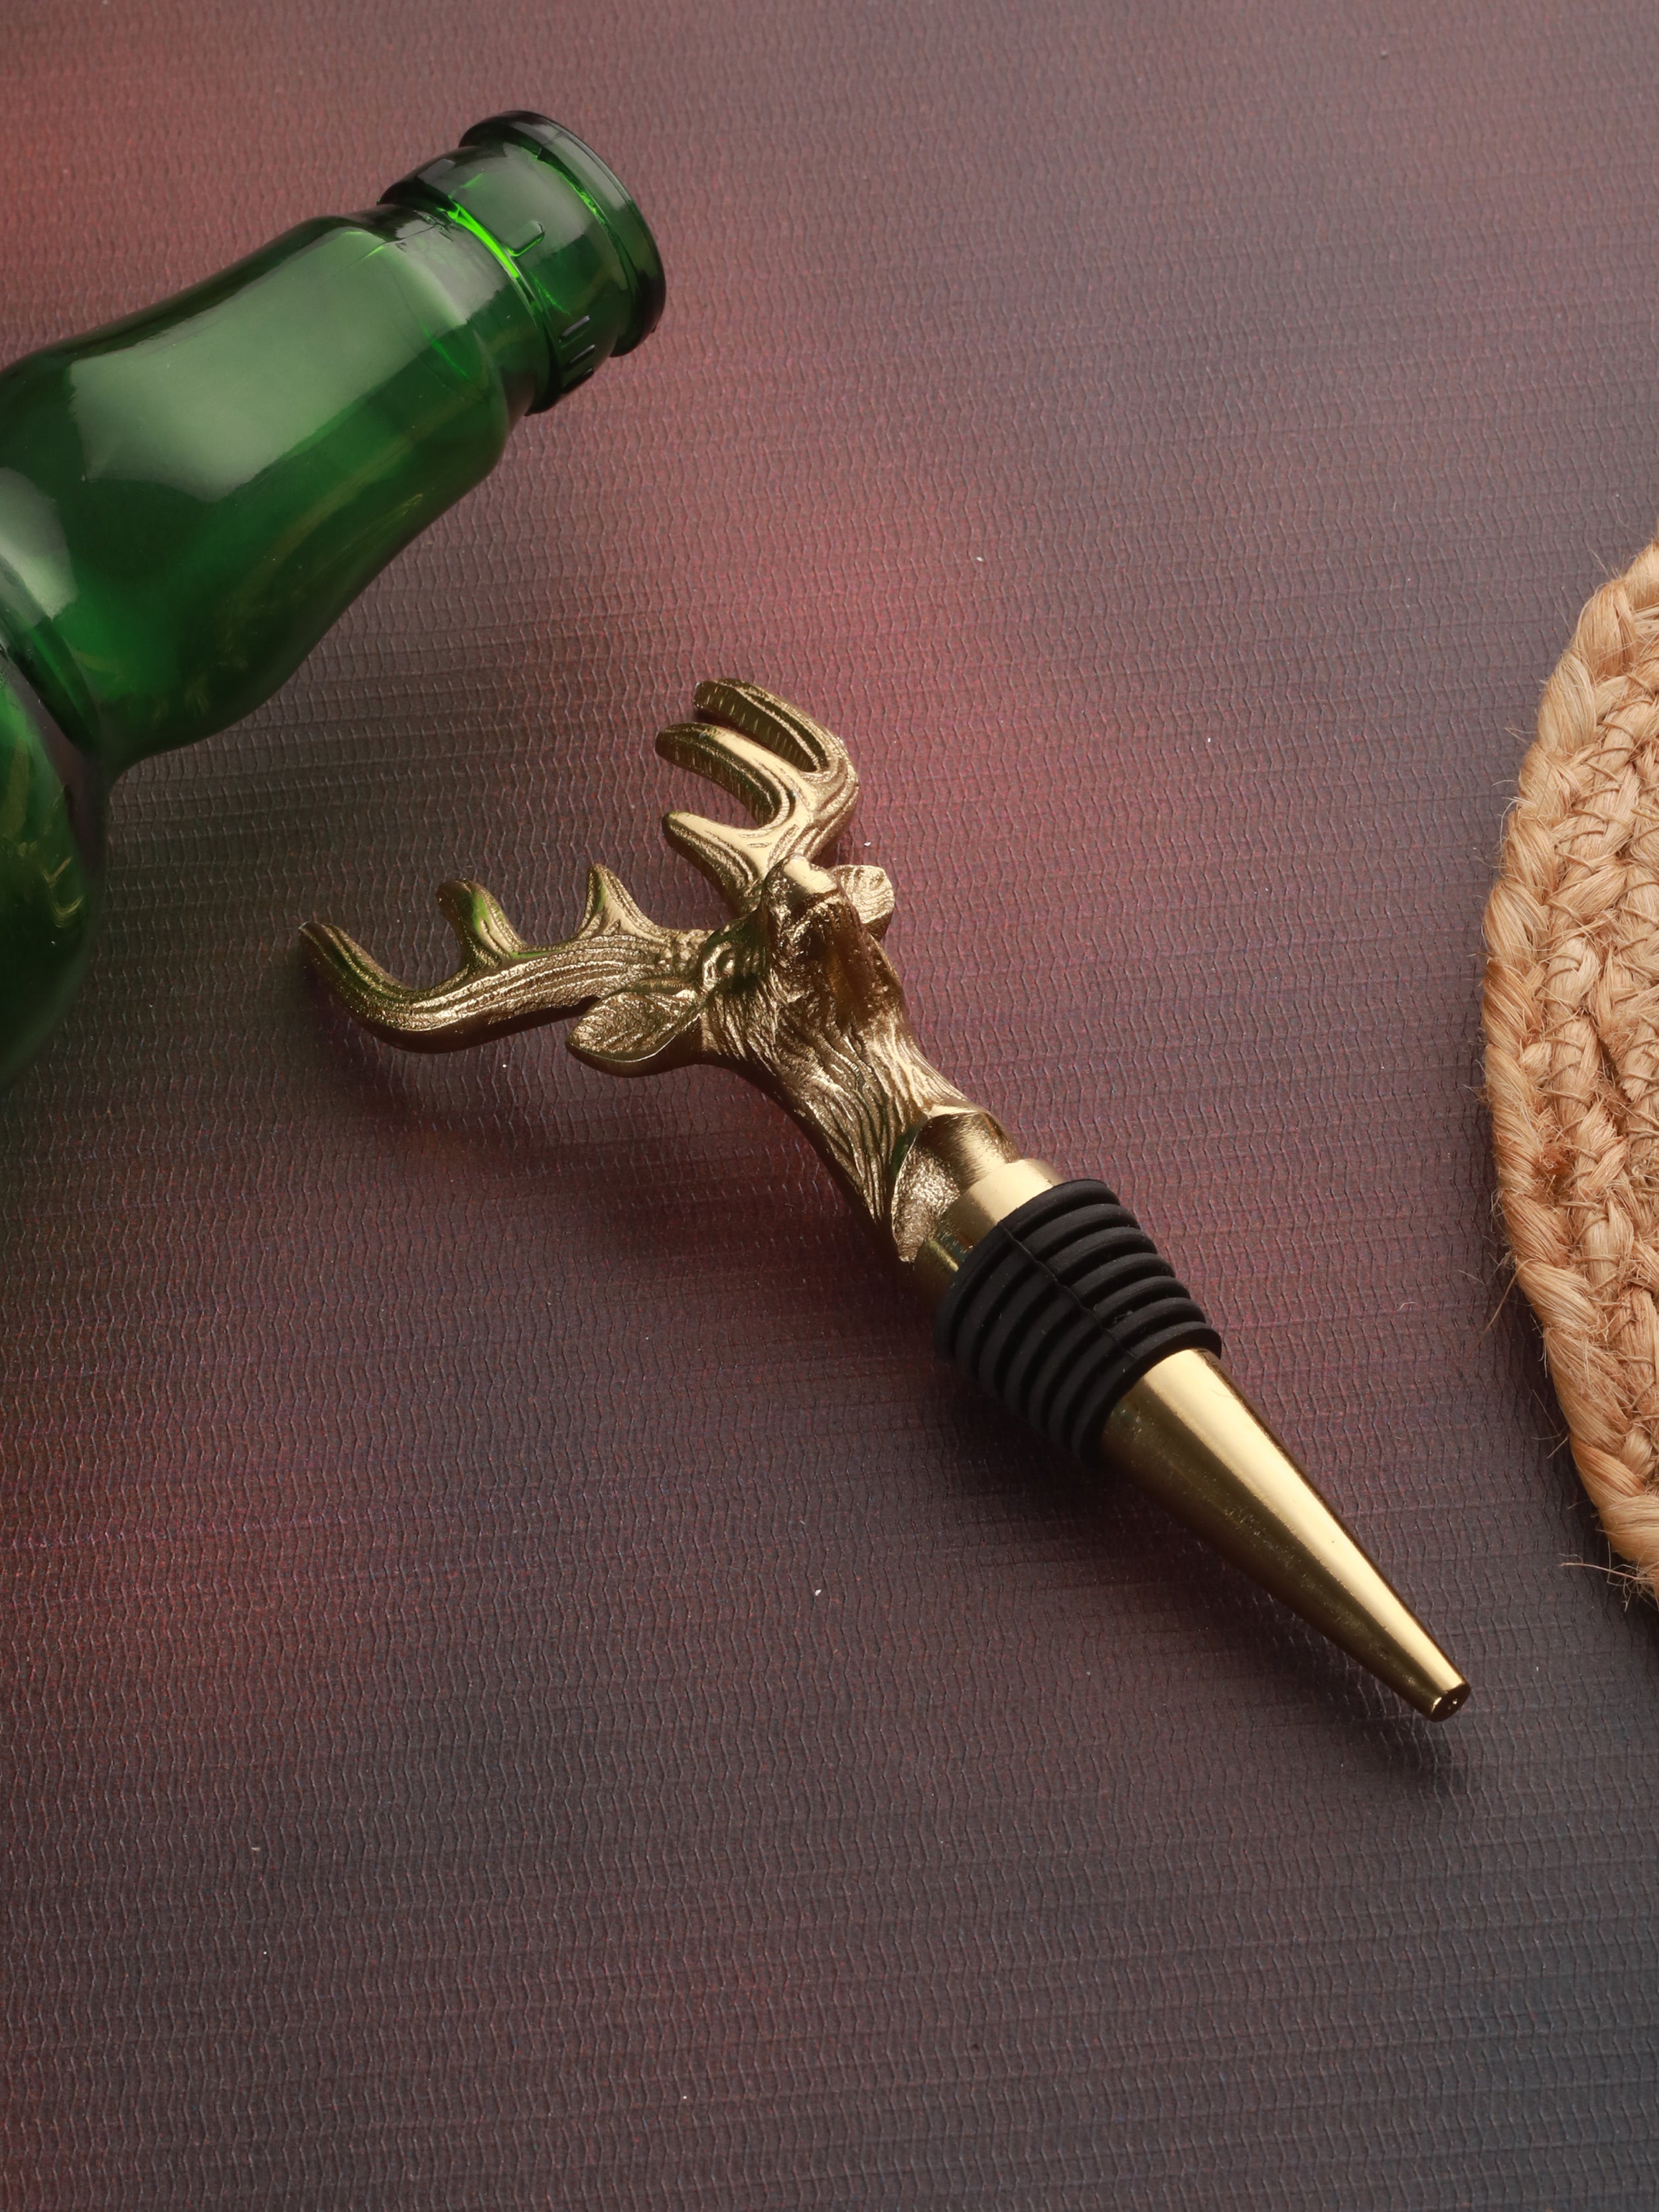 Elegant Deer Bottle Stopper - Preserve Your Wines with Style